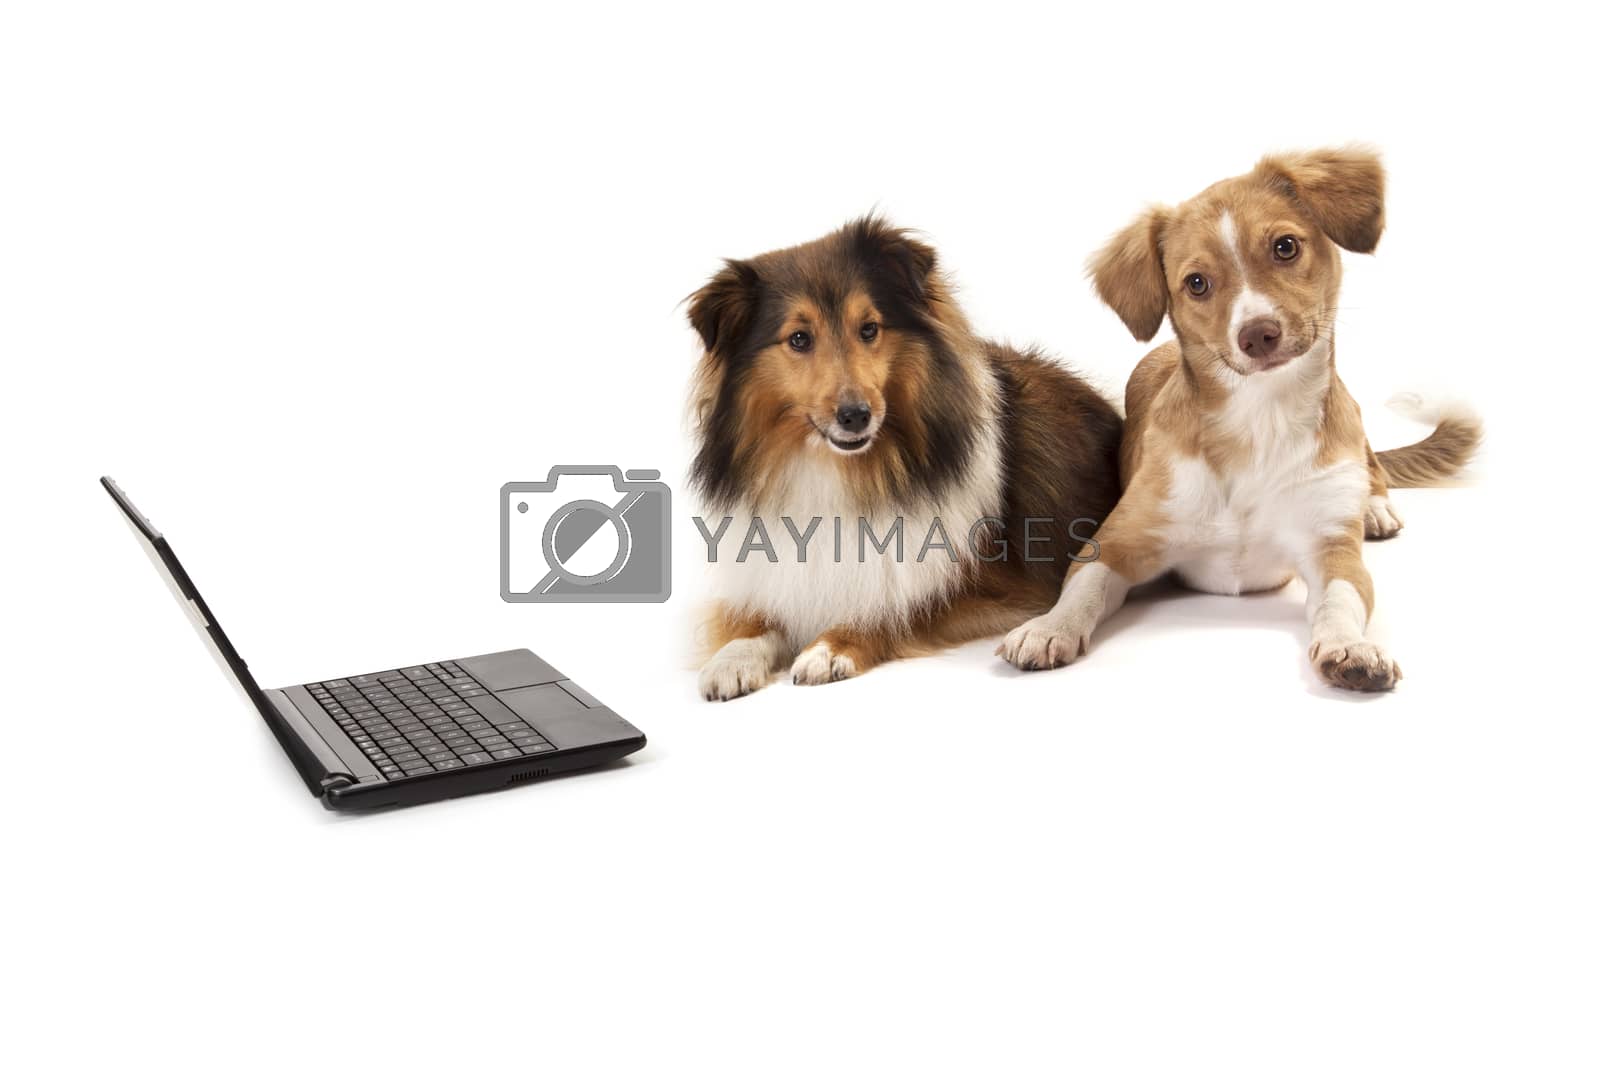 Royalty free image of Dogs sitting besides laptop by Aarstudio